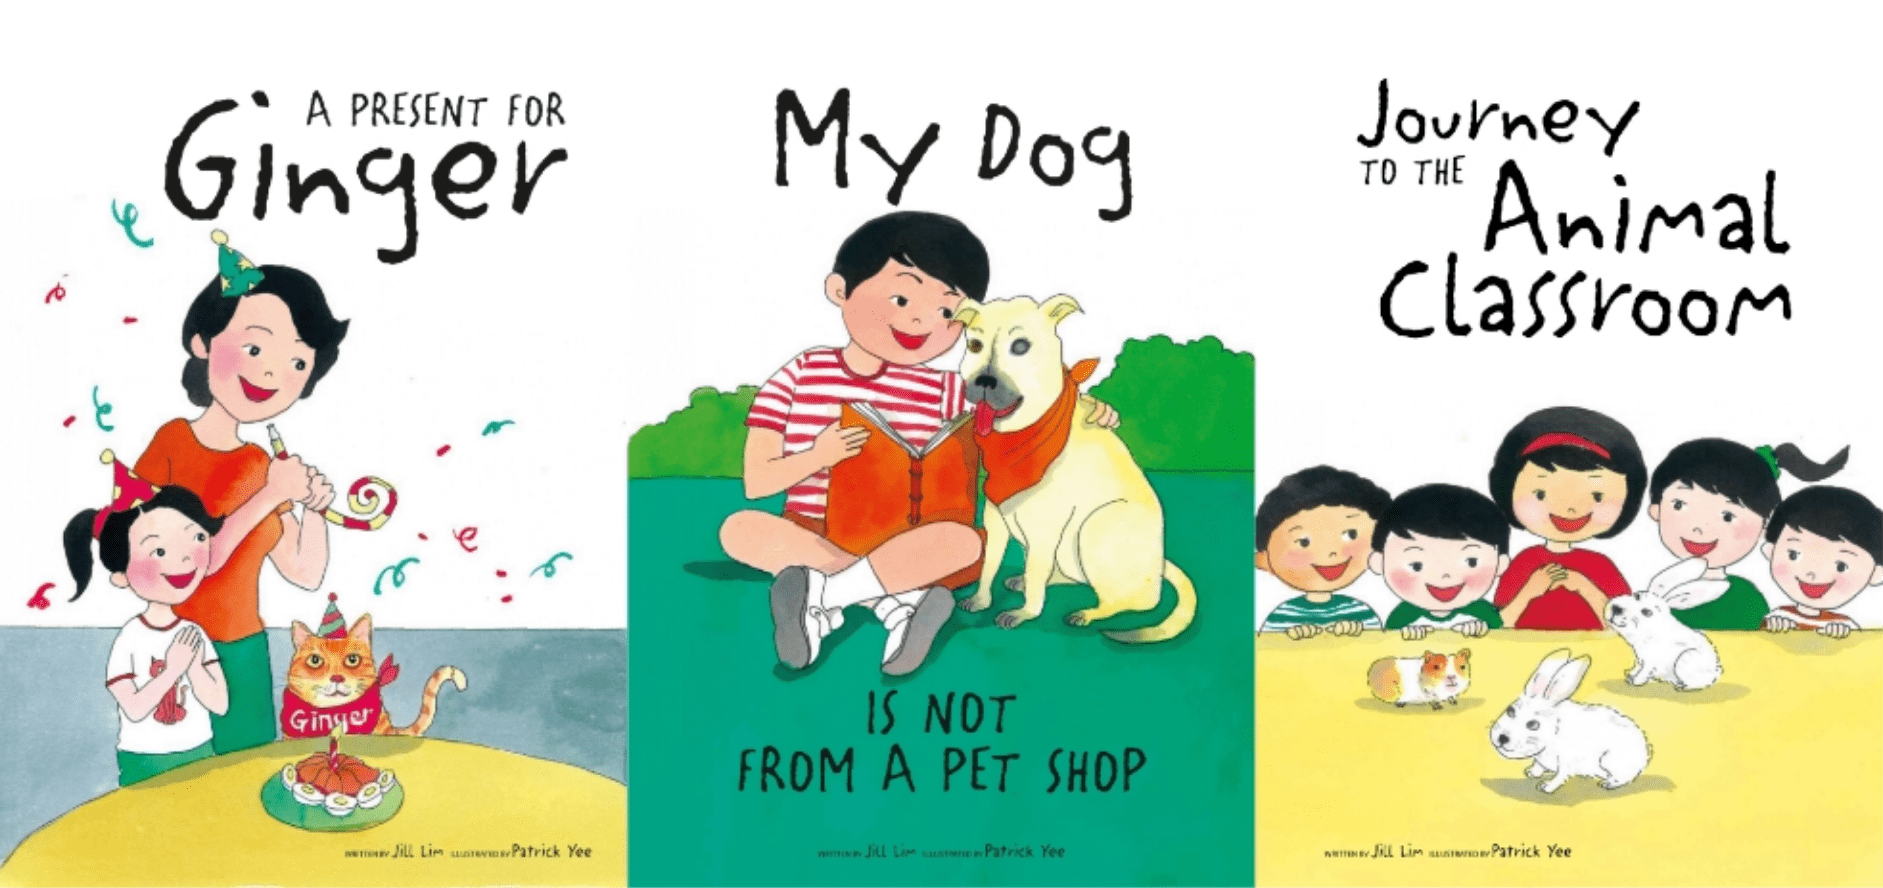 A Present for Ginger, My Dog is Not from a Pet Shop, Journey to the Animal Classroom